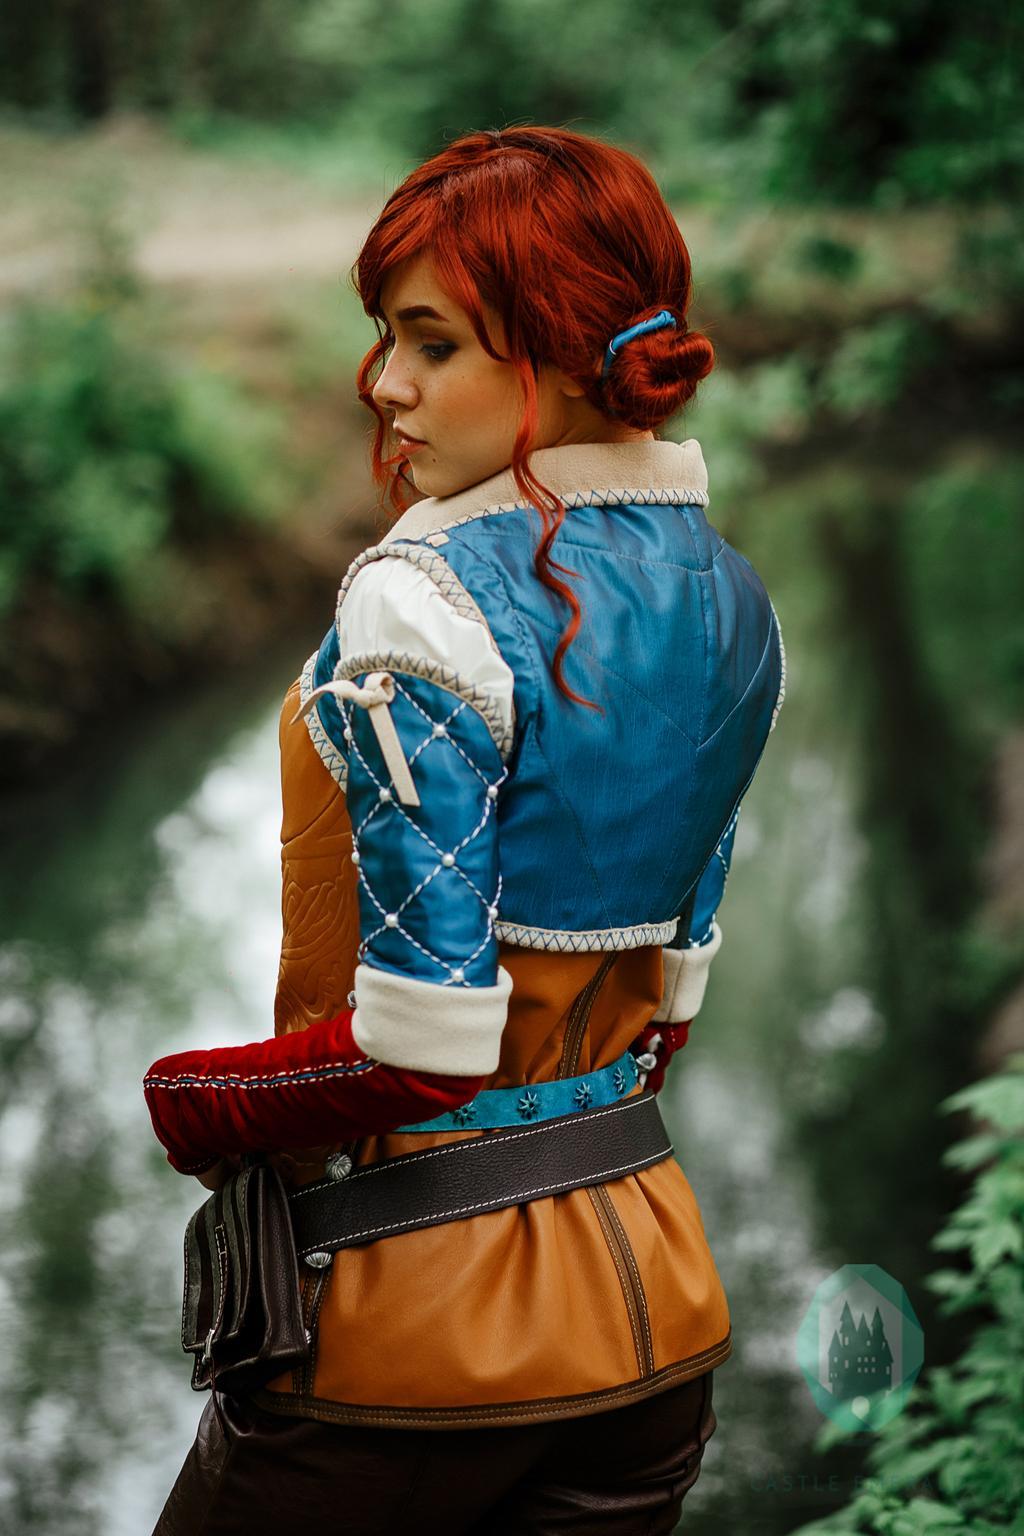 60+ Hot Pictures Of Triss Merigold From The Witcher Series Are Delight For Fans 397